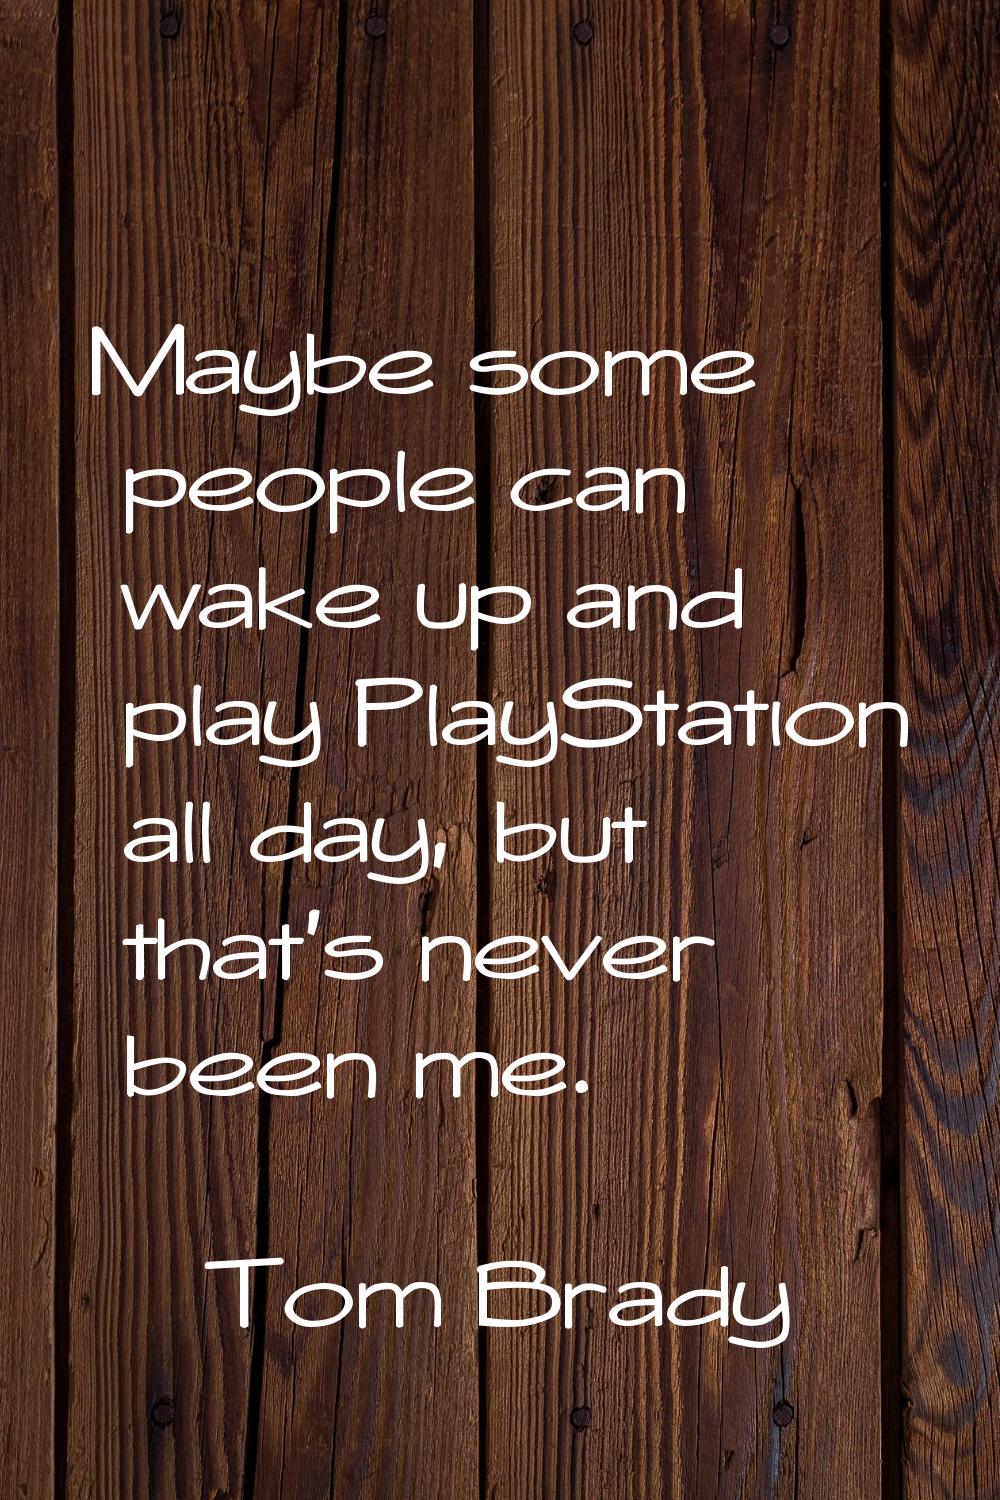 Maybe some people can wake up and play PlayStation all day, but that's never been me.